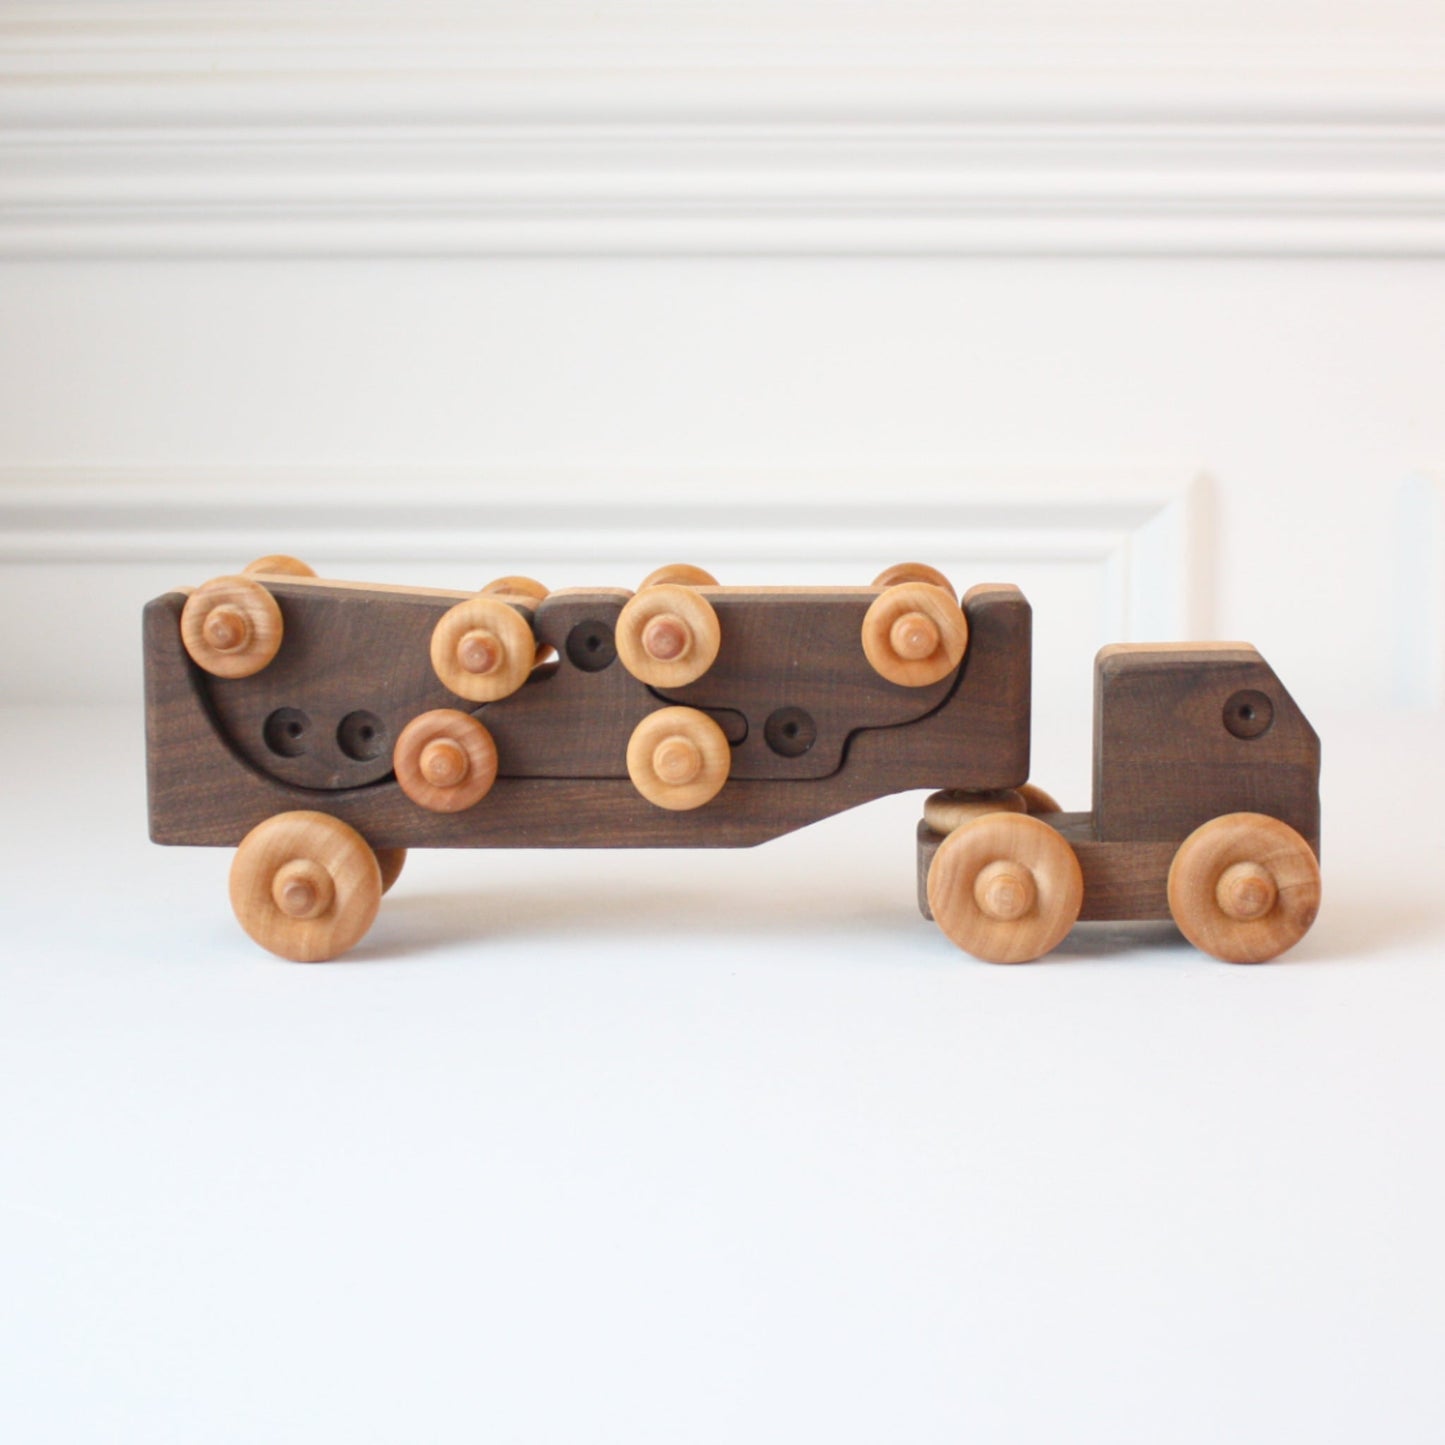 Wooden Transporter Truck with 3 Cars - Made in the USA